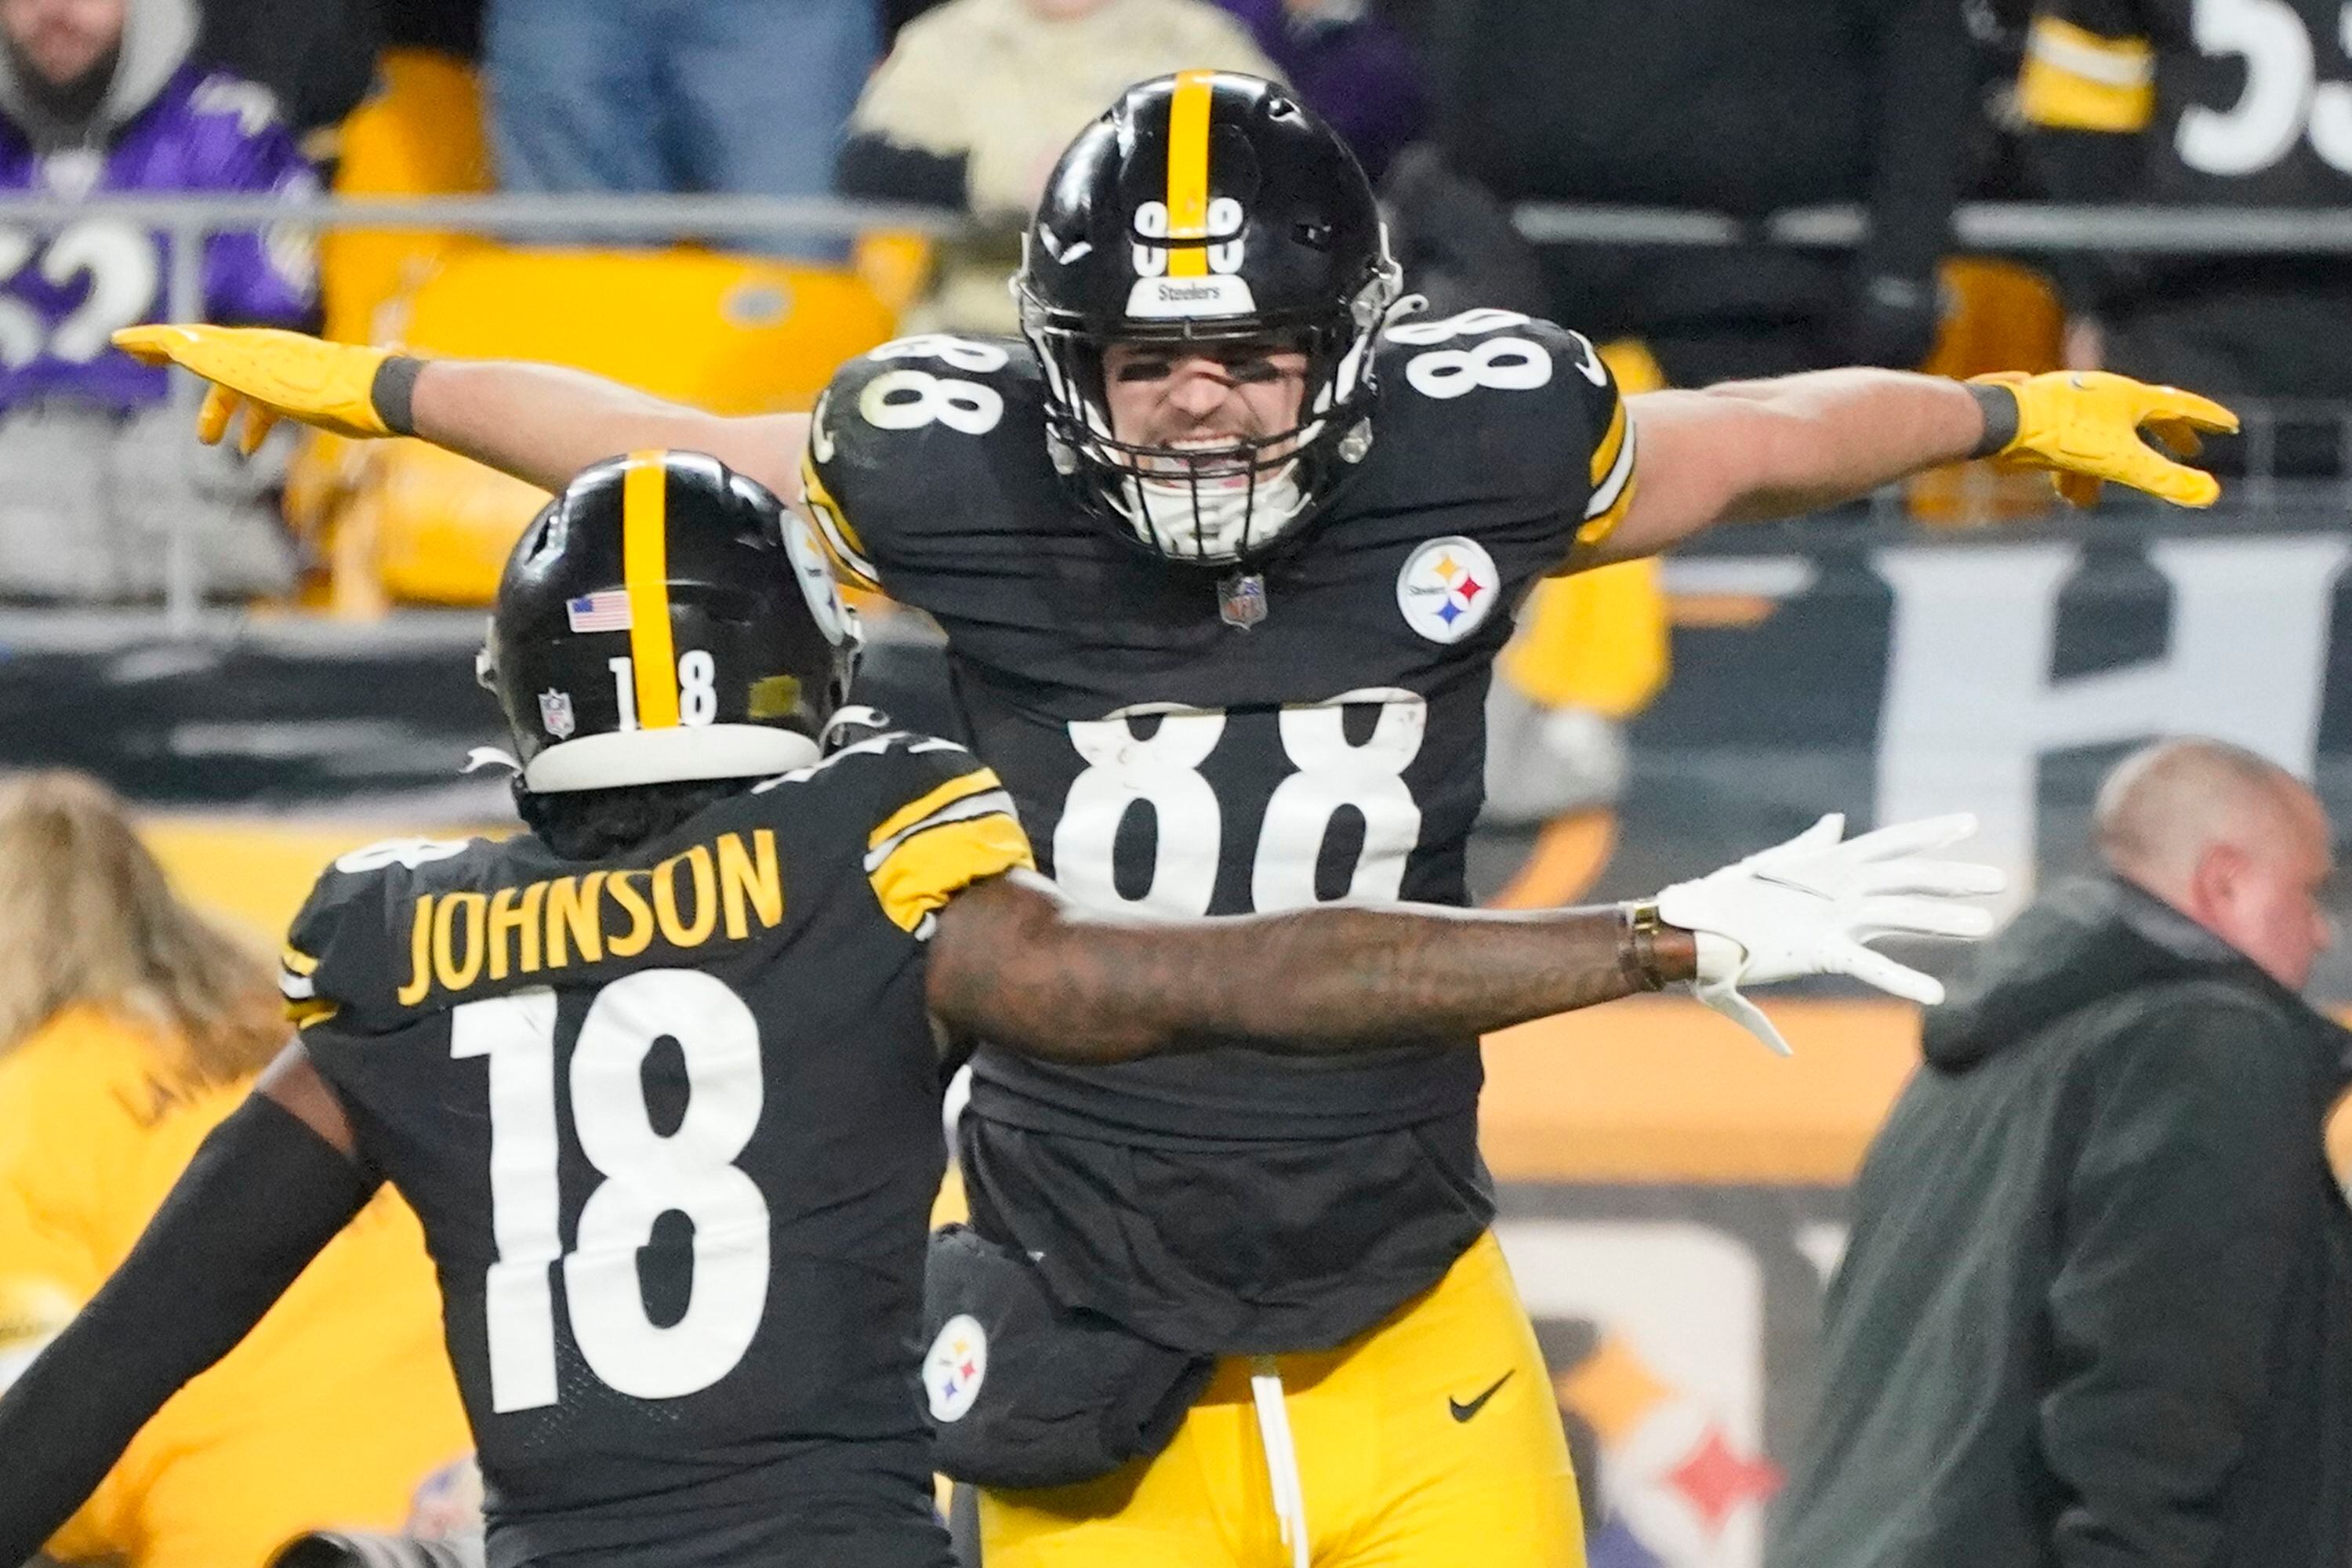 Steelers turn away Ravens 20-19 after failed 2-point attempt